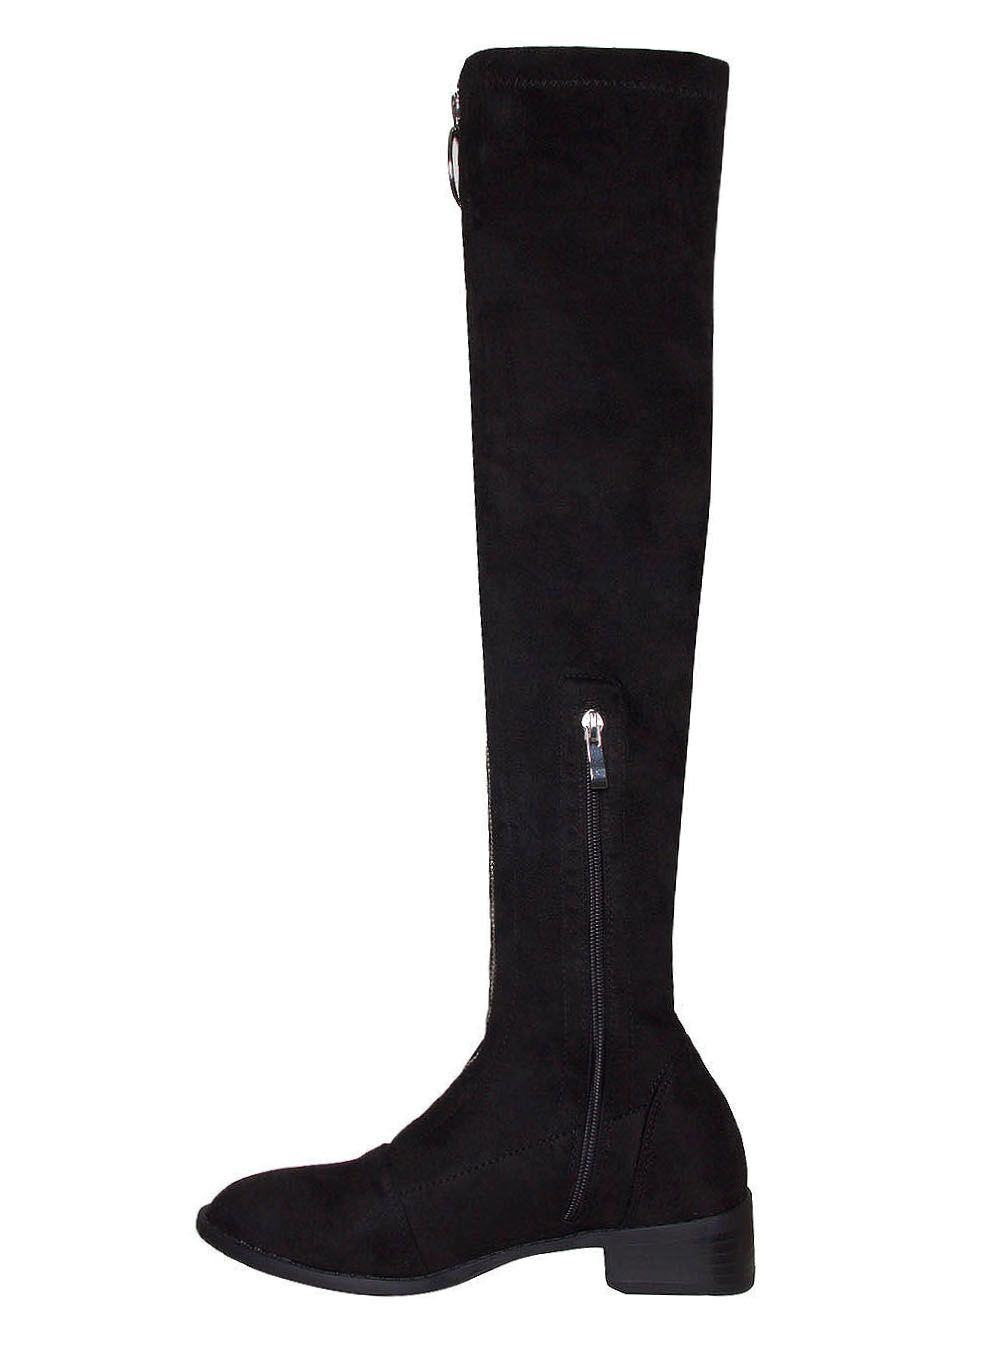 black suede thigh high boots flat